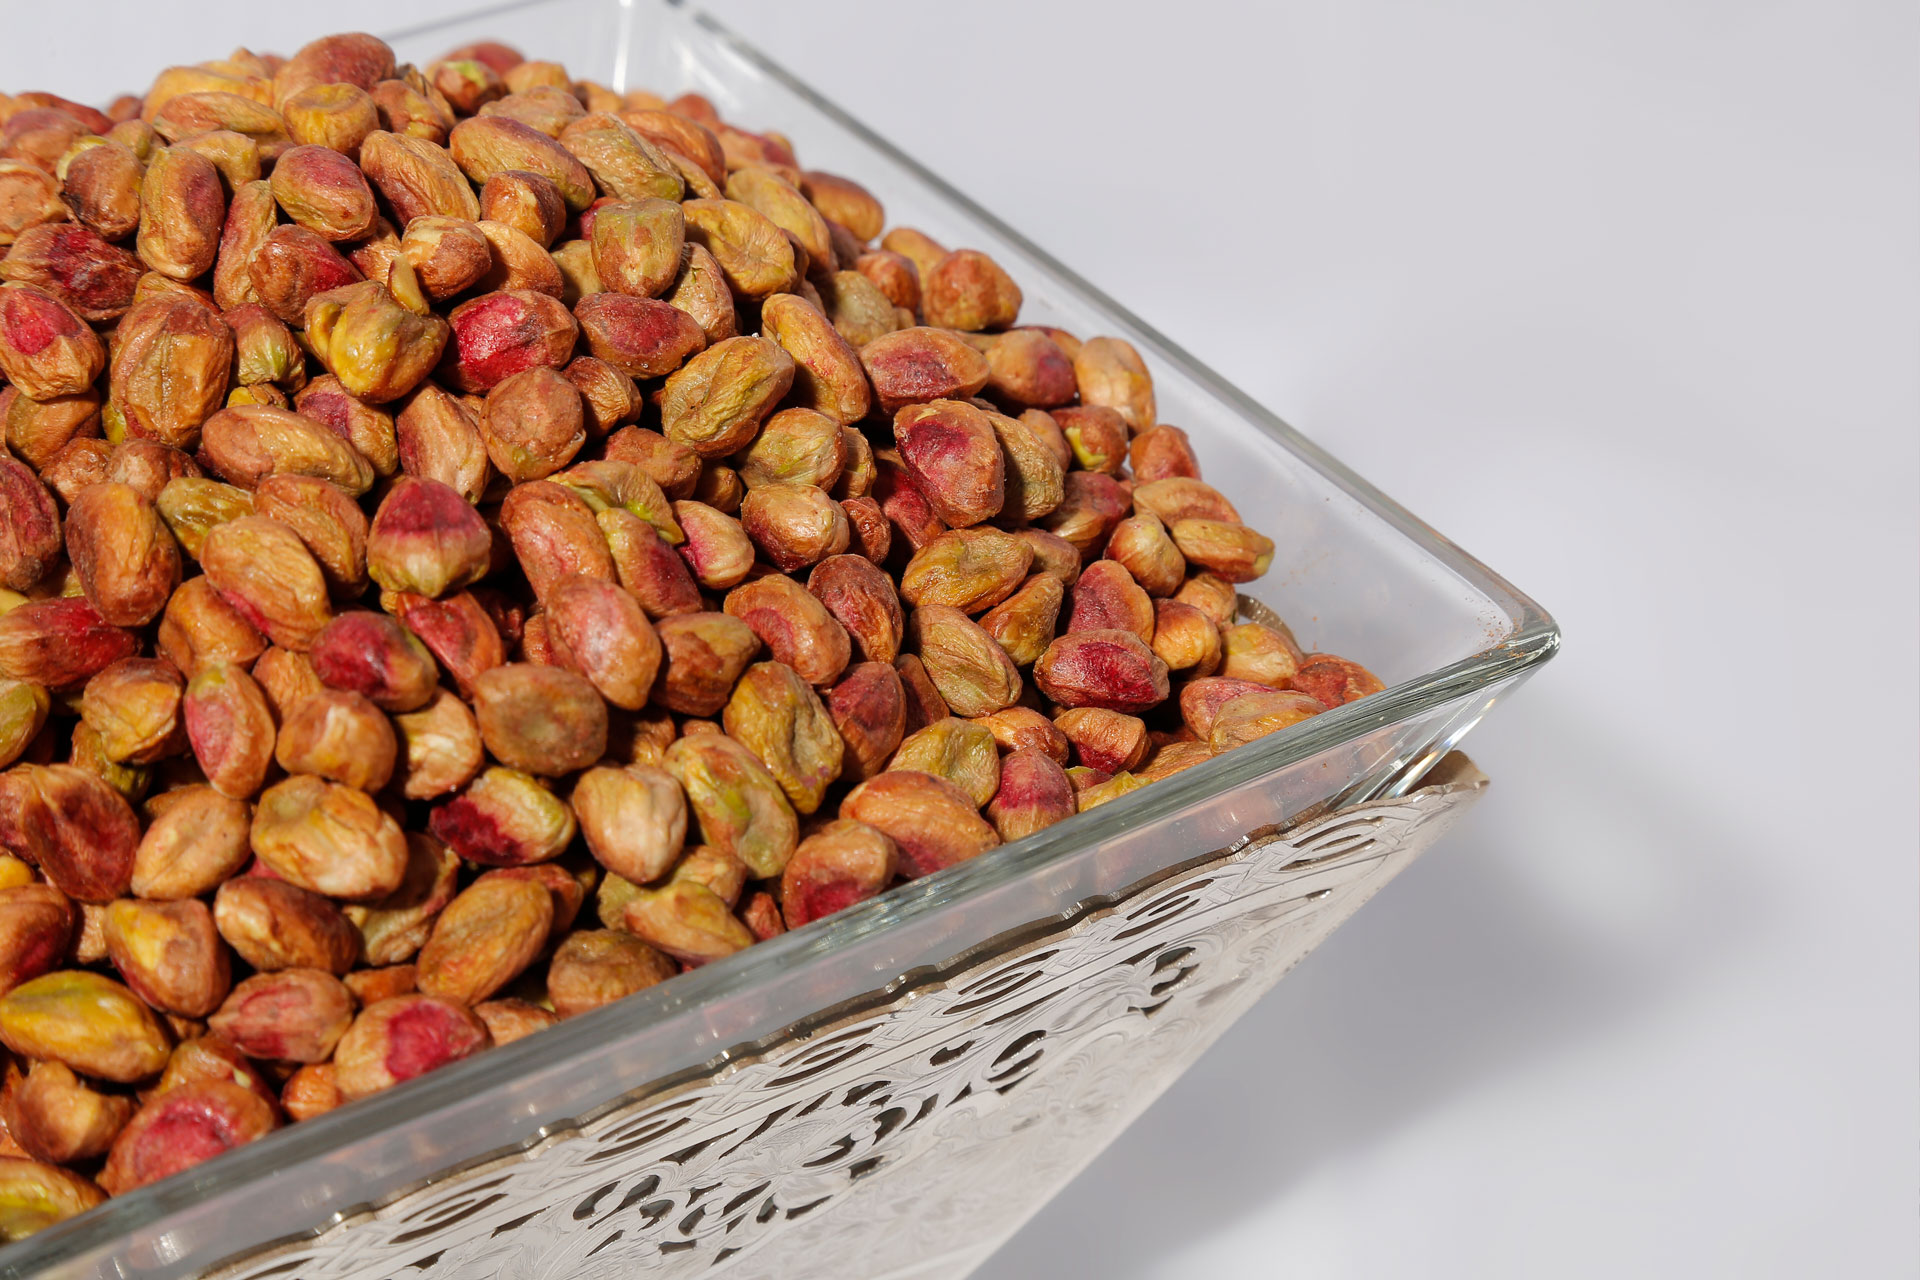 Production and Export of Nutex Pistachio Kernel for Iraq